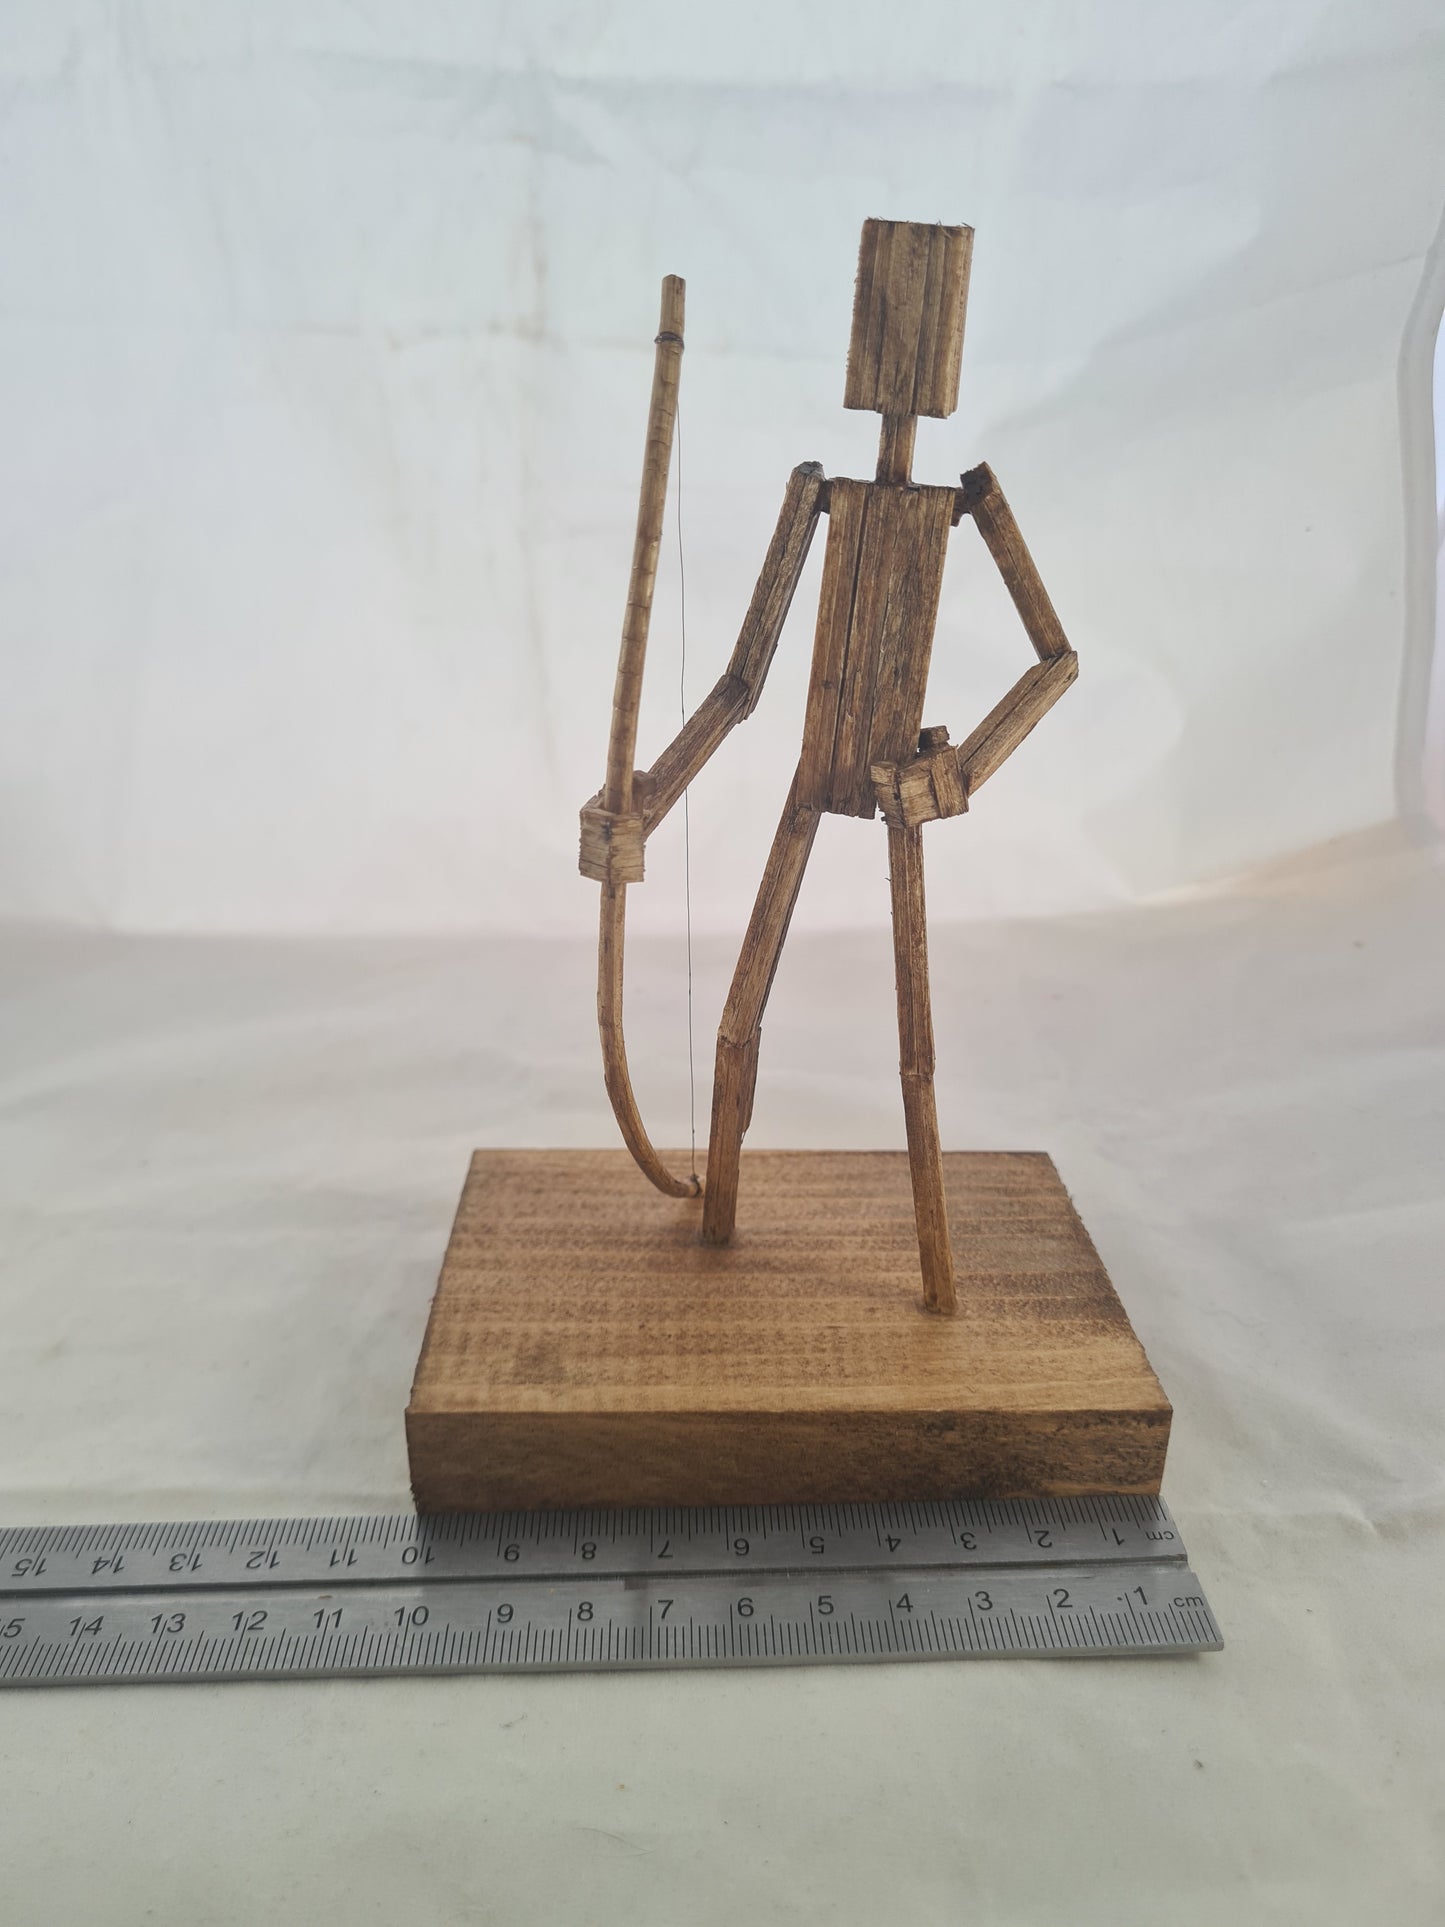 Archer  - Handcrafted Wooden Matchstick Figures - Gifts, Ornaments and Decor By Tiggidy Designs